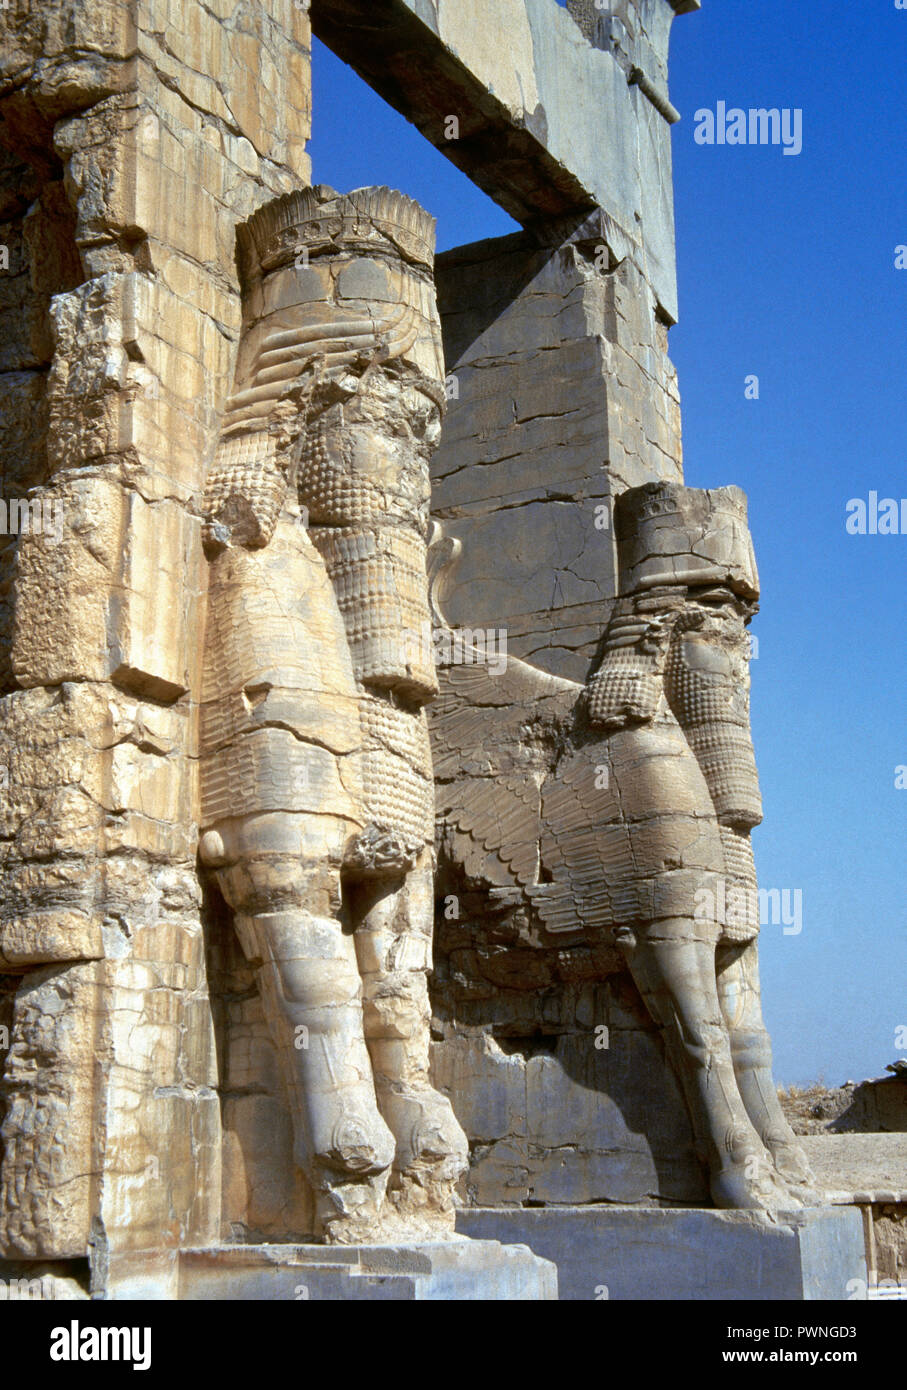 Persepolis. Gate of All Nations (475 BC). It was built by order of Xerxes I (486-465 BC). Western entrance, decorated with colossal sculptures of bulls with human head and wings of eagle. UNESCO World Heritage Site. Islamic Republic of Iran. Stock Photo